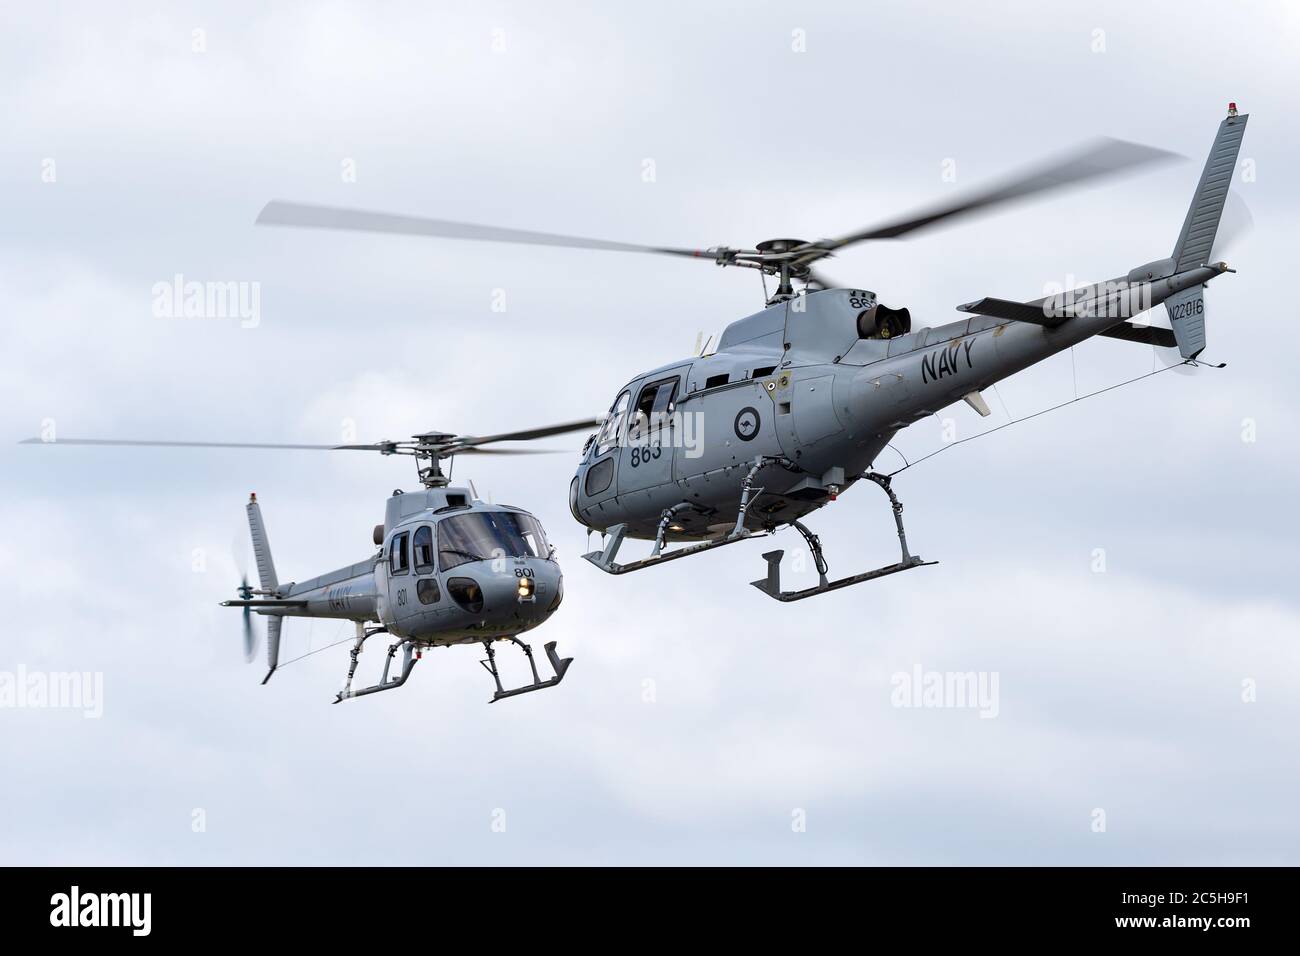 Royal Australian Navy Aerospatiale AS-350B Helicopters (N22-001 & N22-016) from HMAS Albartoss flying in close formation. Stock Photo